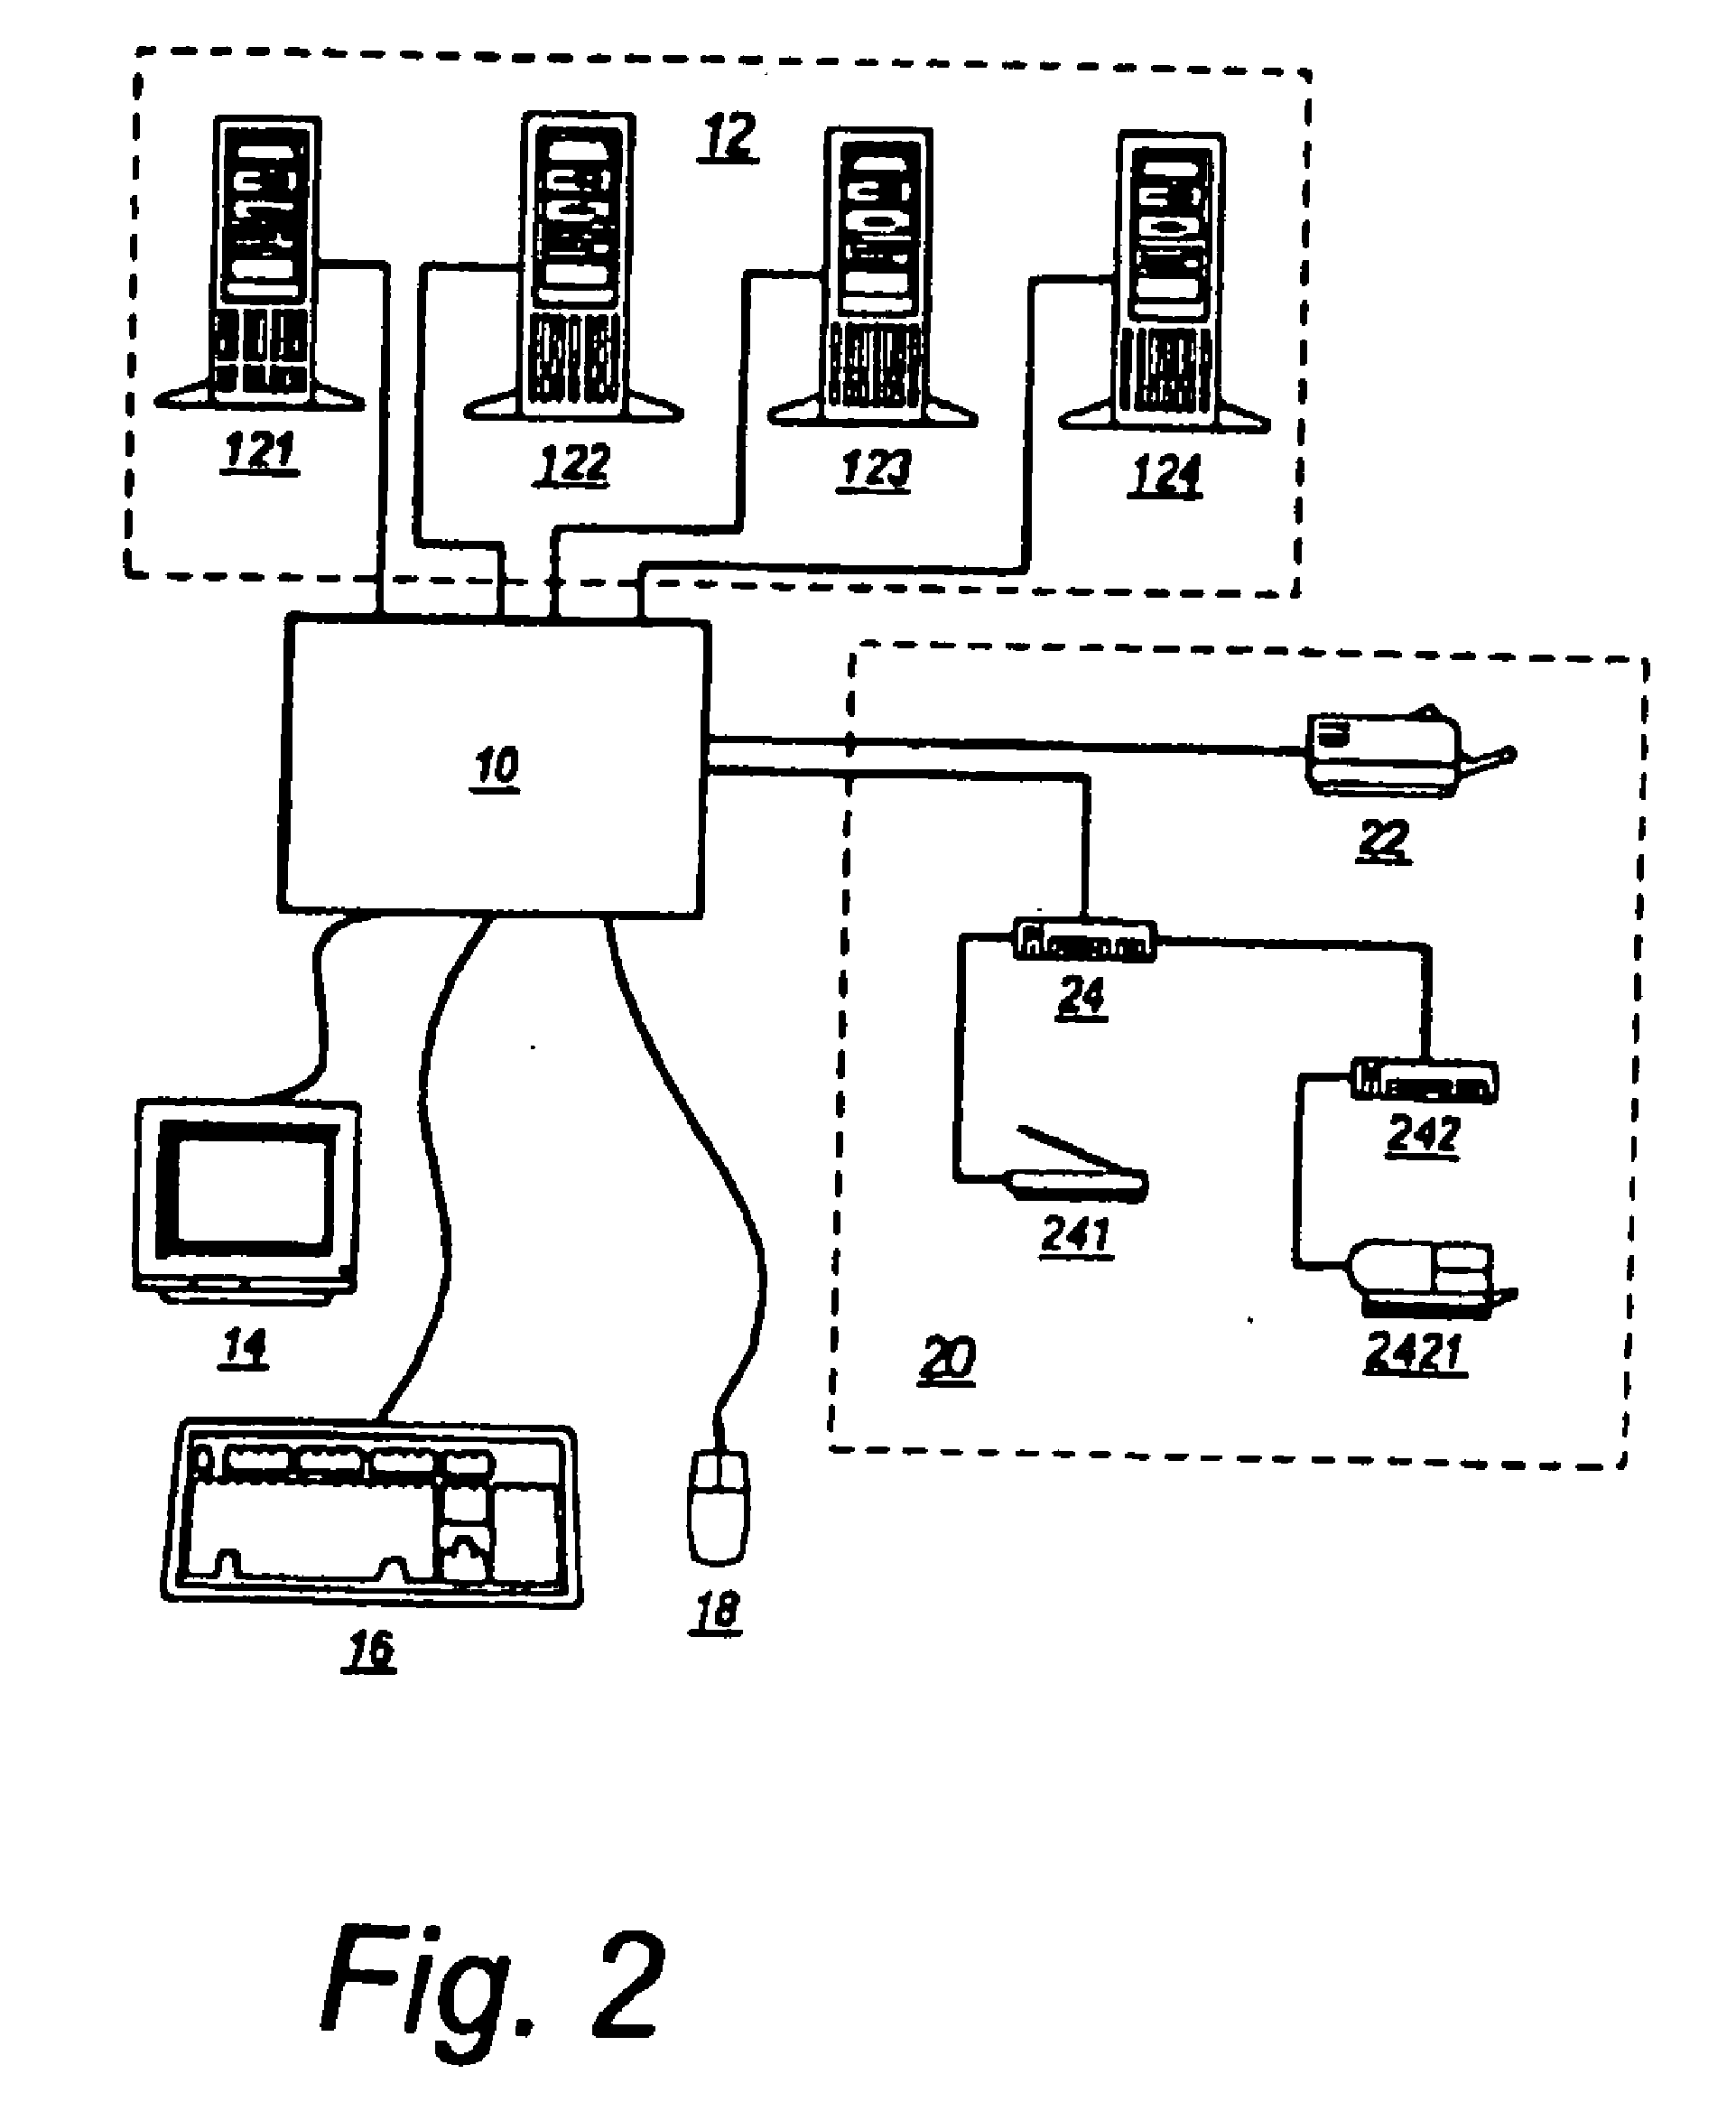 Asynchronous/synchronous kvmp switch for console devices and peripheral devices